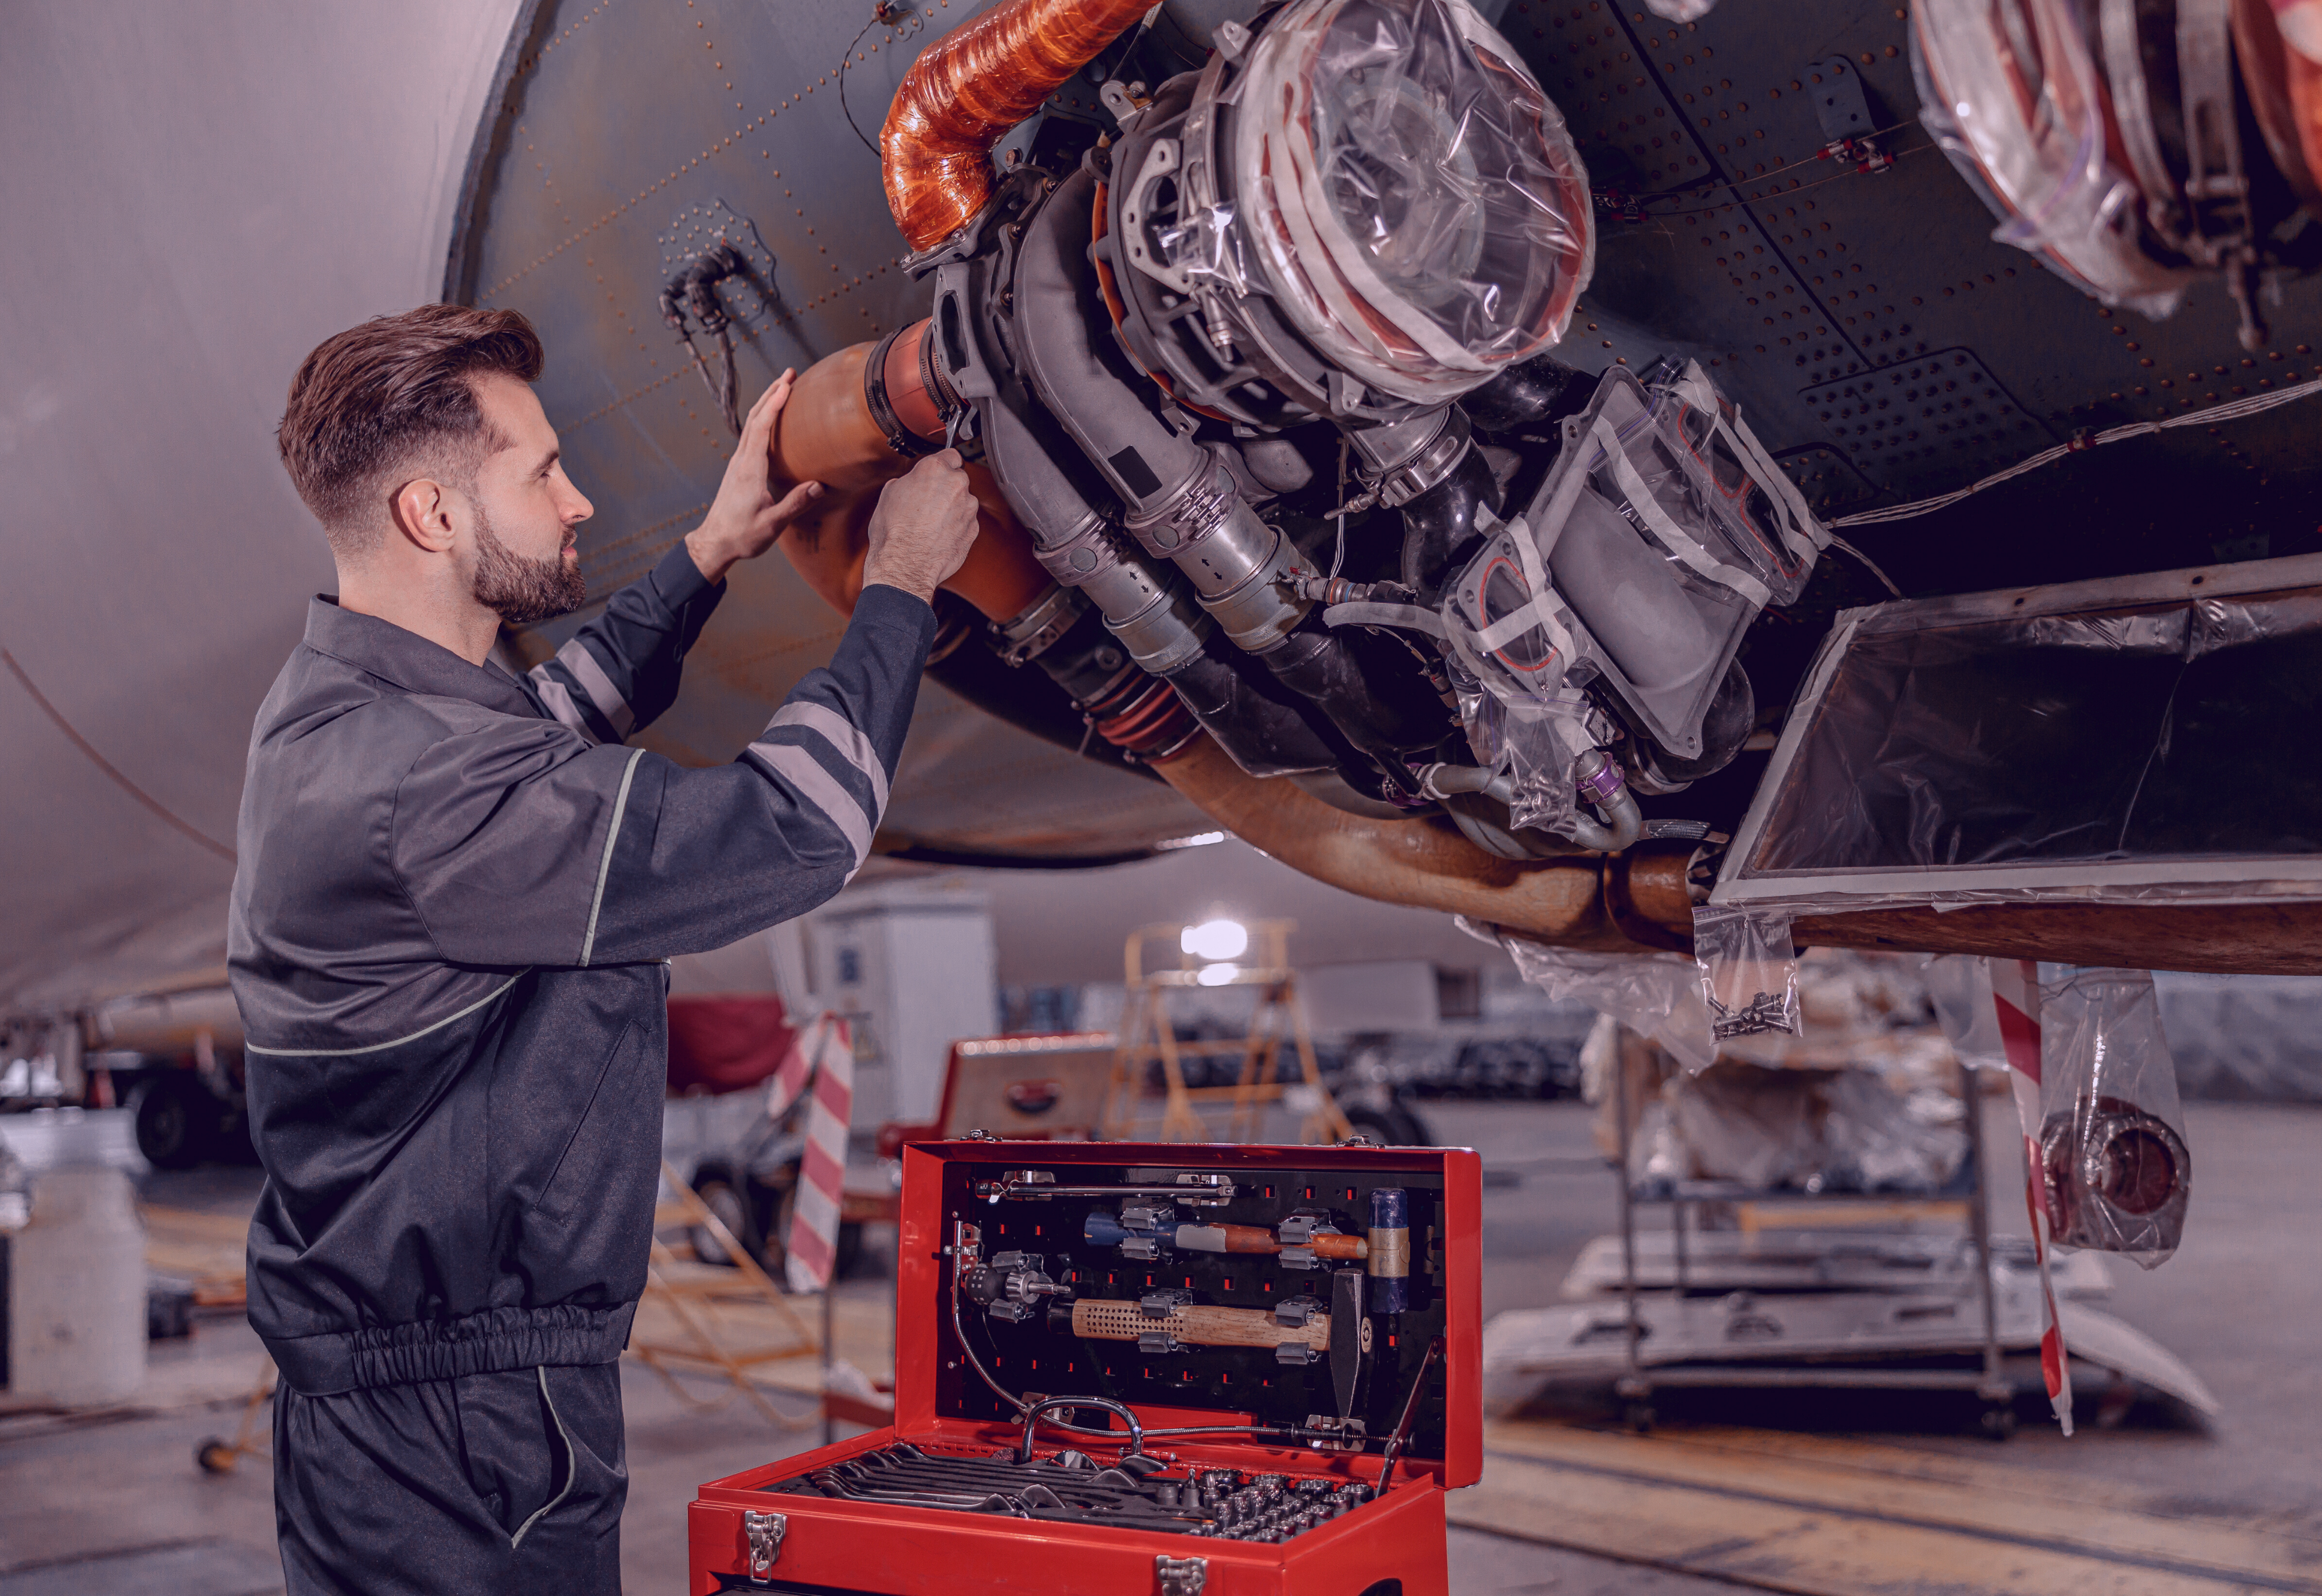 An aviation mechanic carrying out maintenance work following an aviation job search with M&E Global.